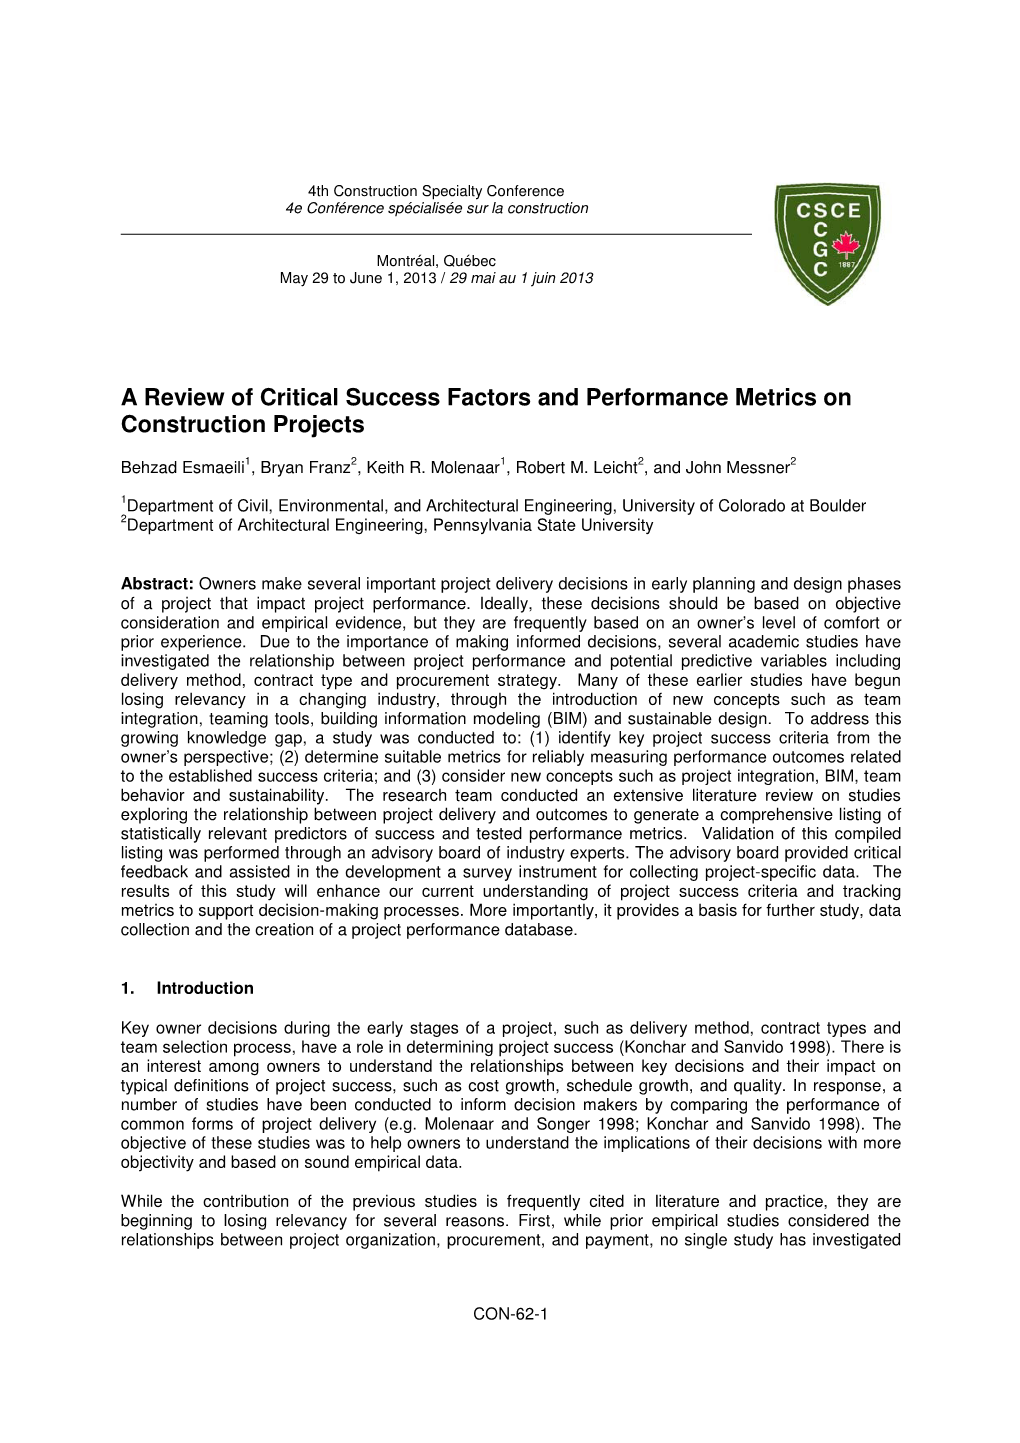 A Review of Critical Success Factors and Performance Metrics on Construction Projects